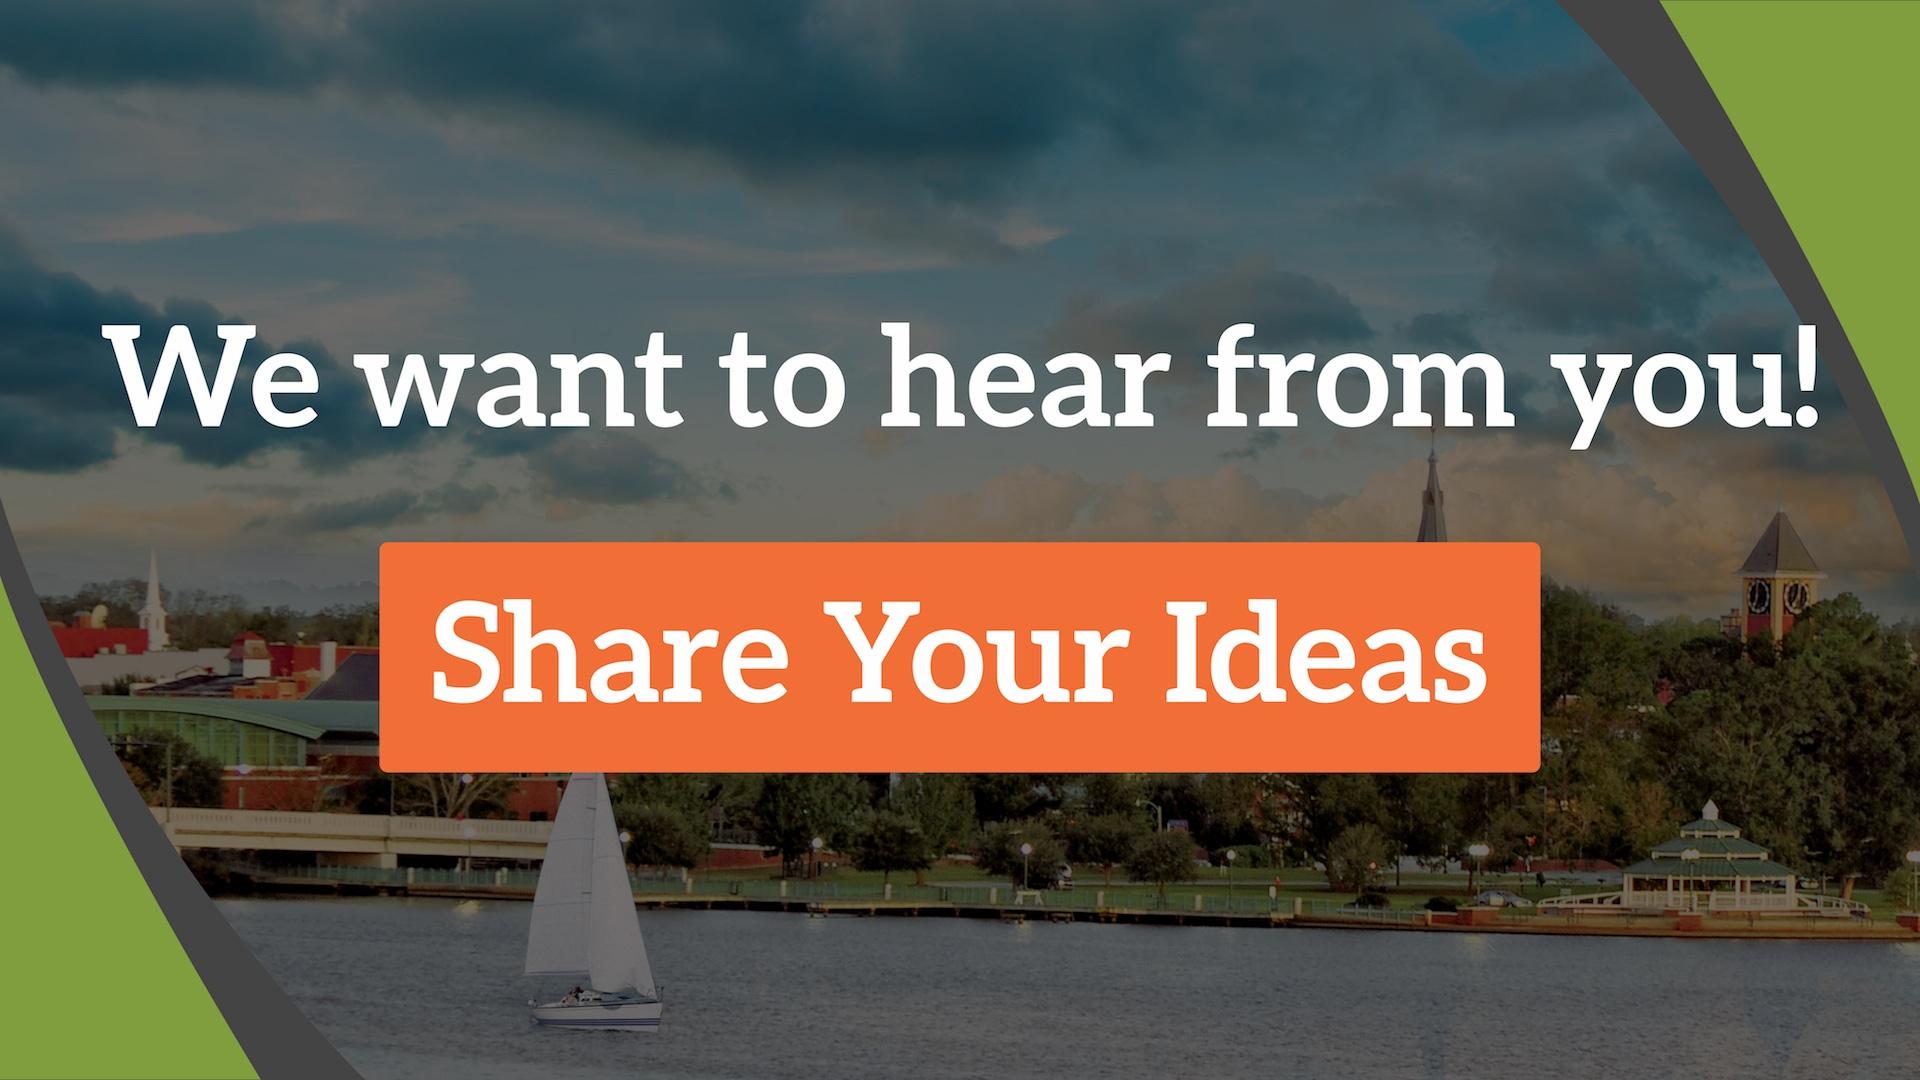 We want to hear from you! Share your ideas here.